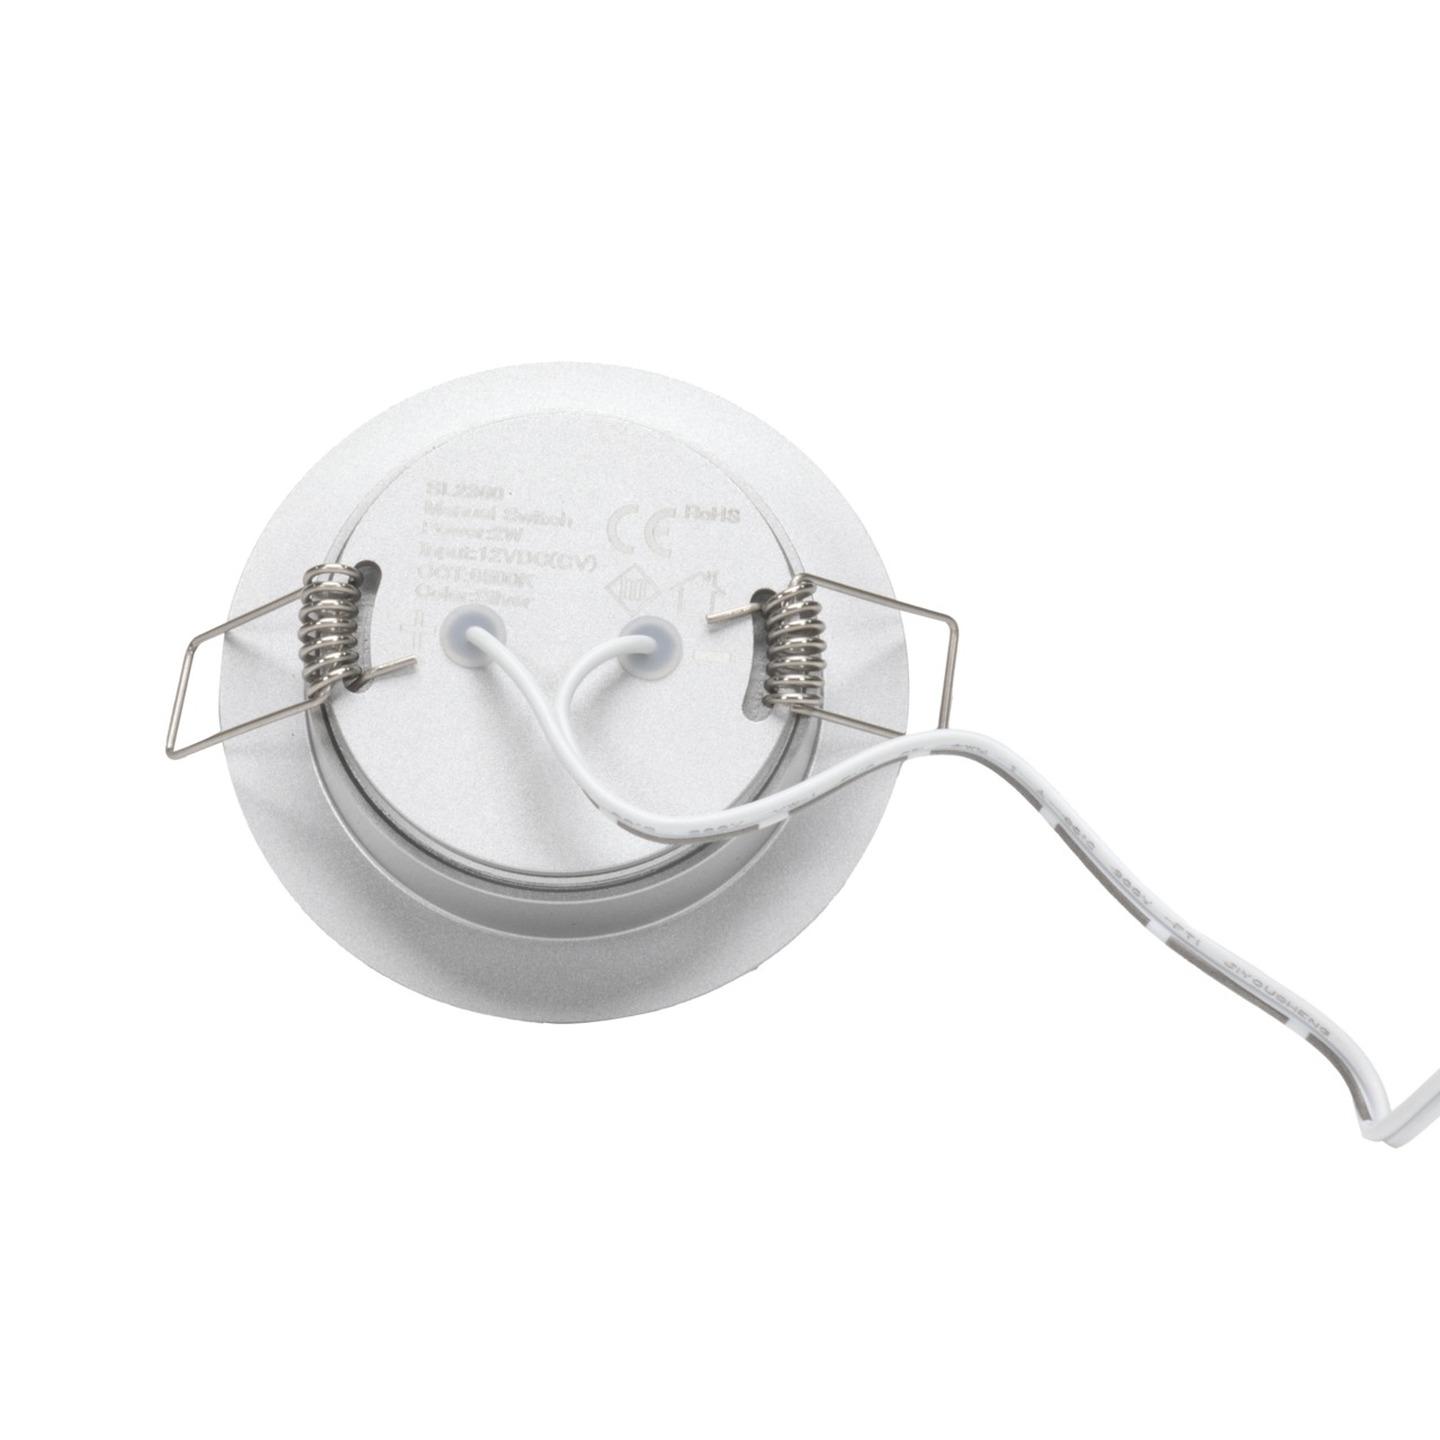 2W 11-16VDC Cool White LED Downlight with Push Button Diffuser Silver